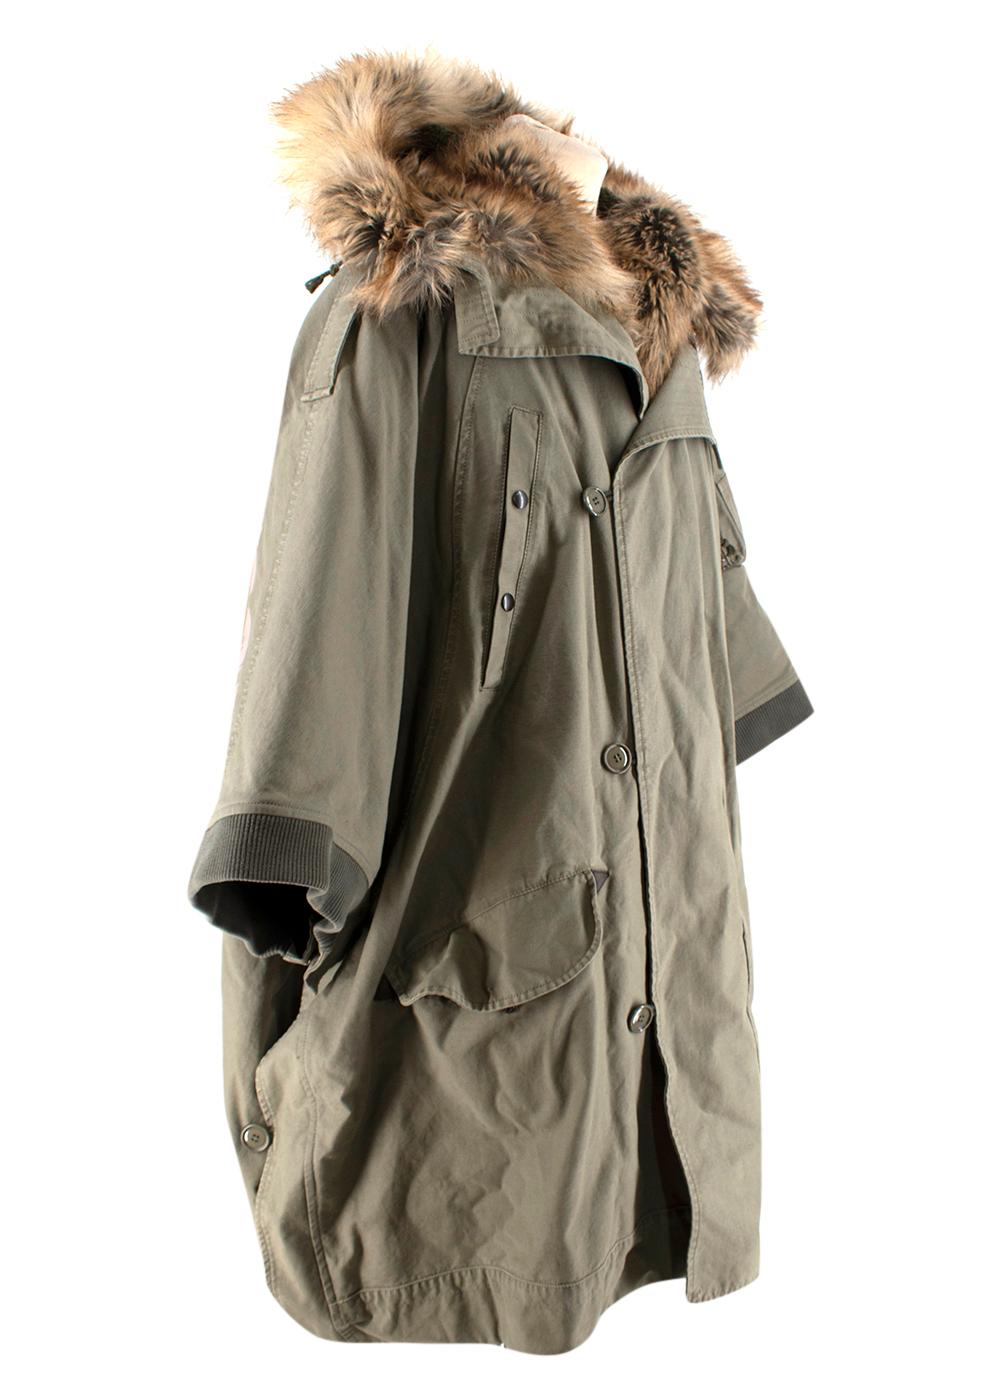 Faith Connexion Khaki Cotton Parka with Faux-Fur Trim

- Cape style coat with faux fur trim and hood
- Teddy fleece lined 
- Logo print to the back 
- Multiple functioning pockets
- Zip and button-up closure 

Materials 
100% Cotton 
Fake Furs 
65%